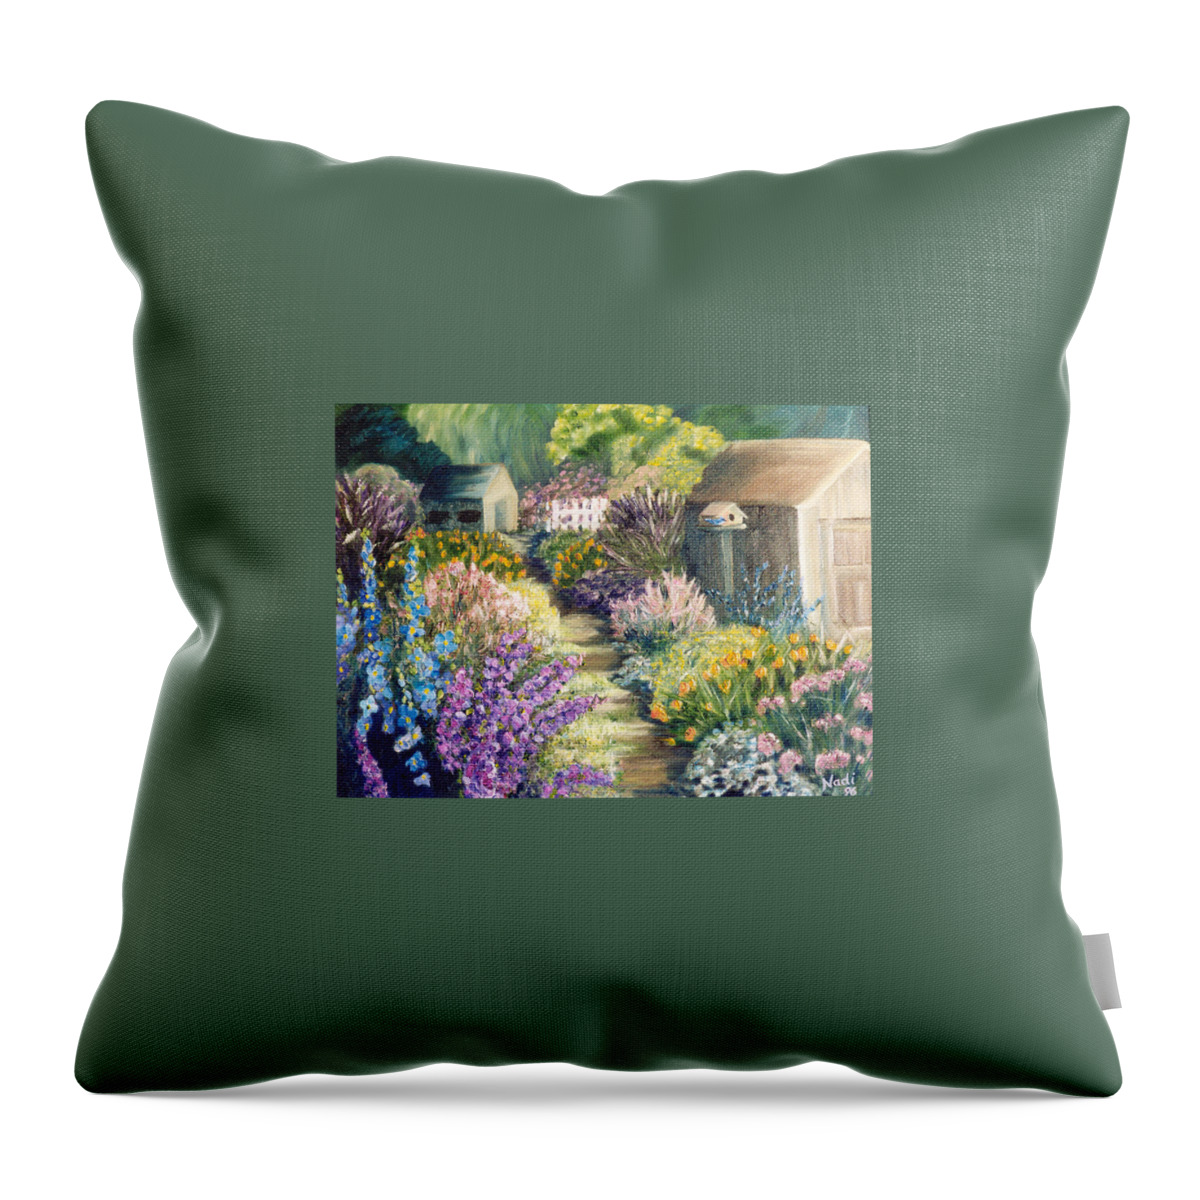 Impressionism Throw Pillow featuring the painting The Garden Path by Renate Wesley